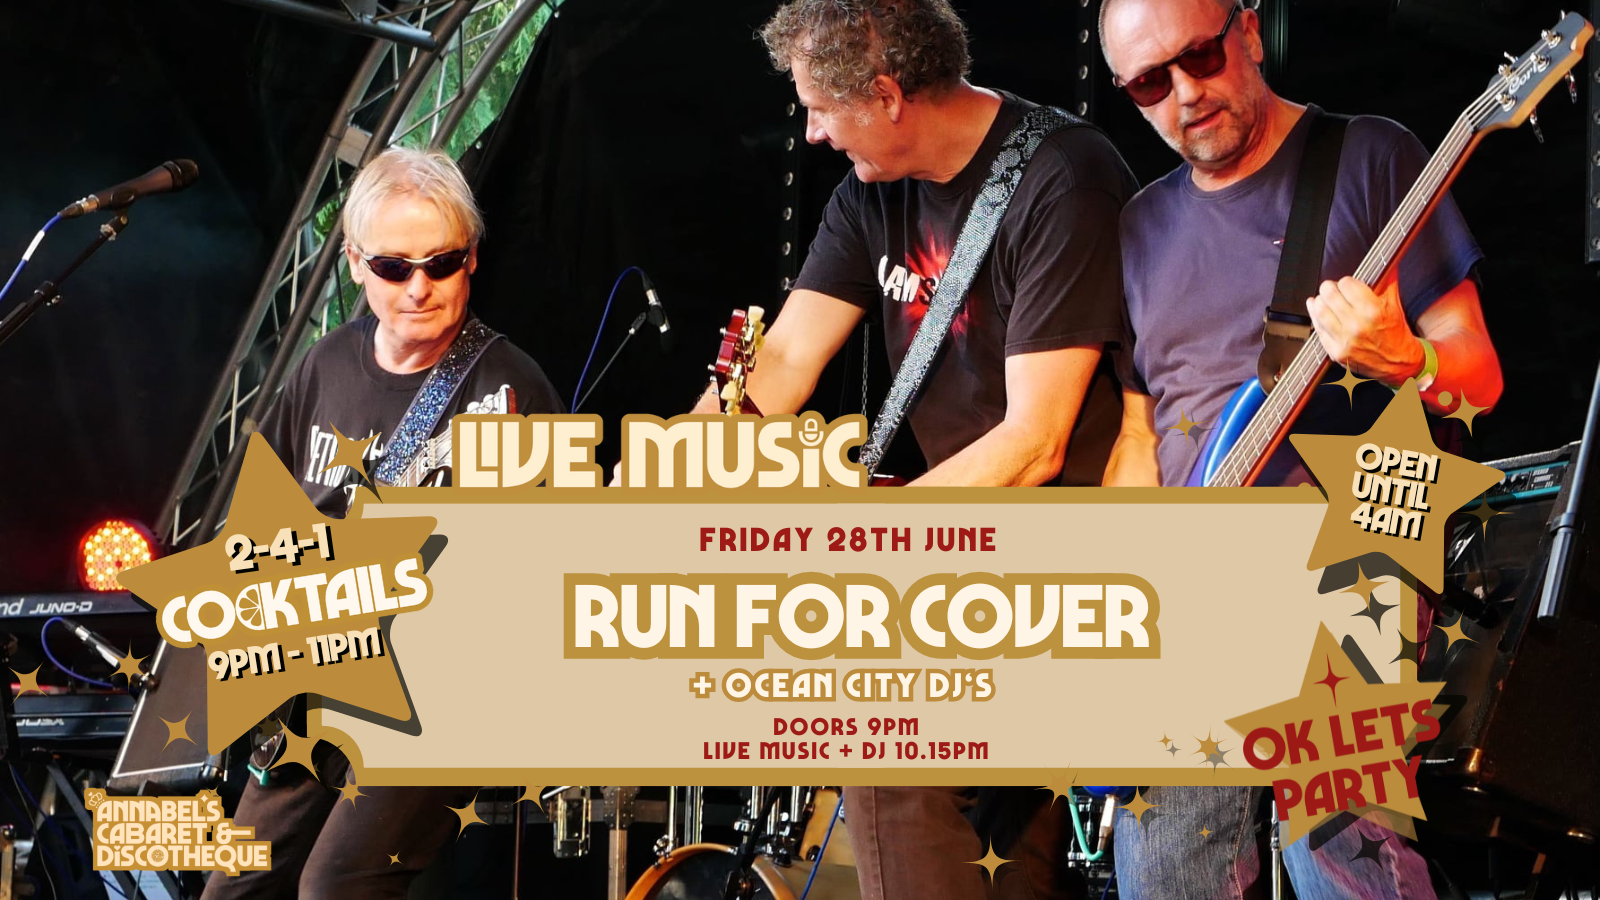 ‘Live Music: RUN FOR COVER // Annabel’s Cabaret & Discotheque